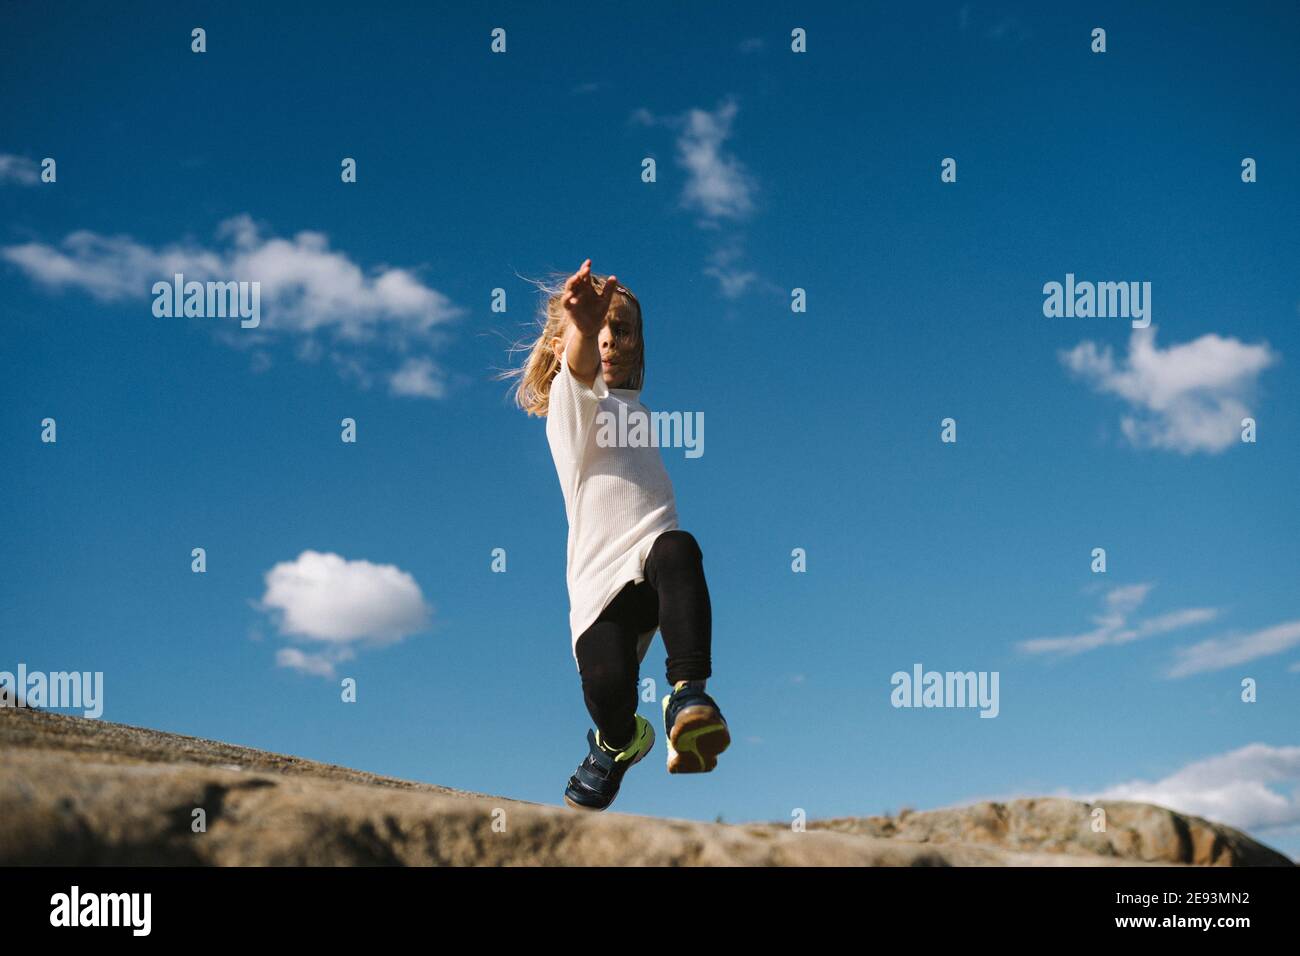 Low angle view of girl jumping on rocks Stock Photo